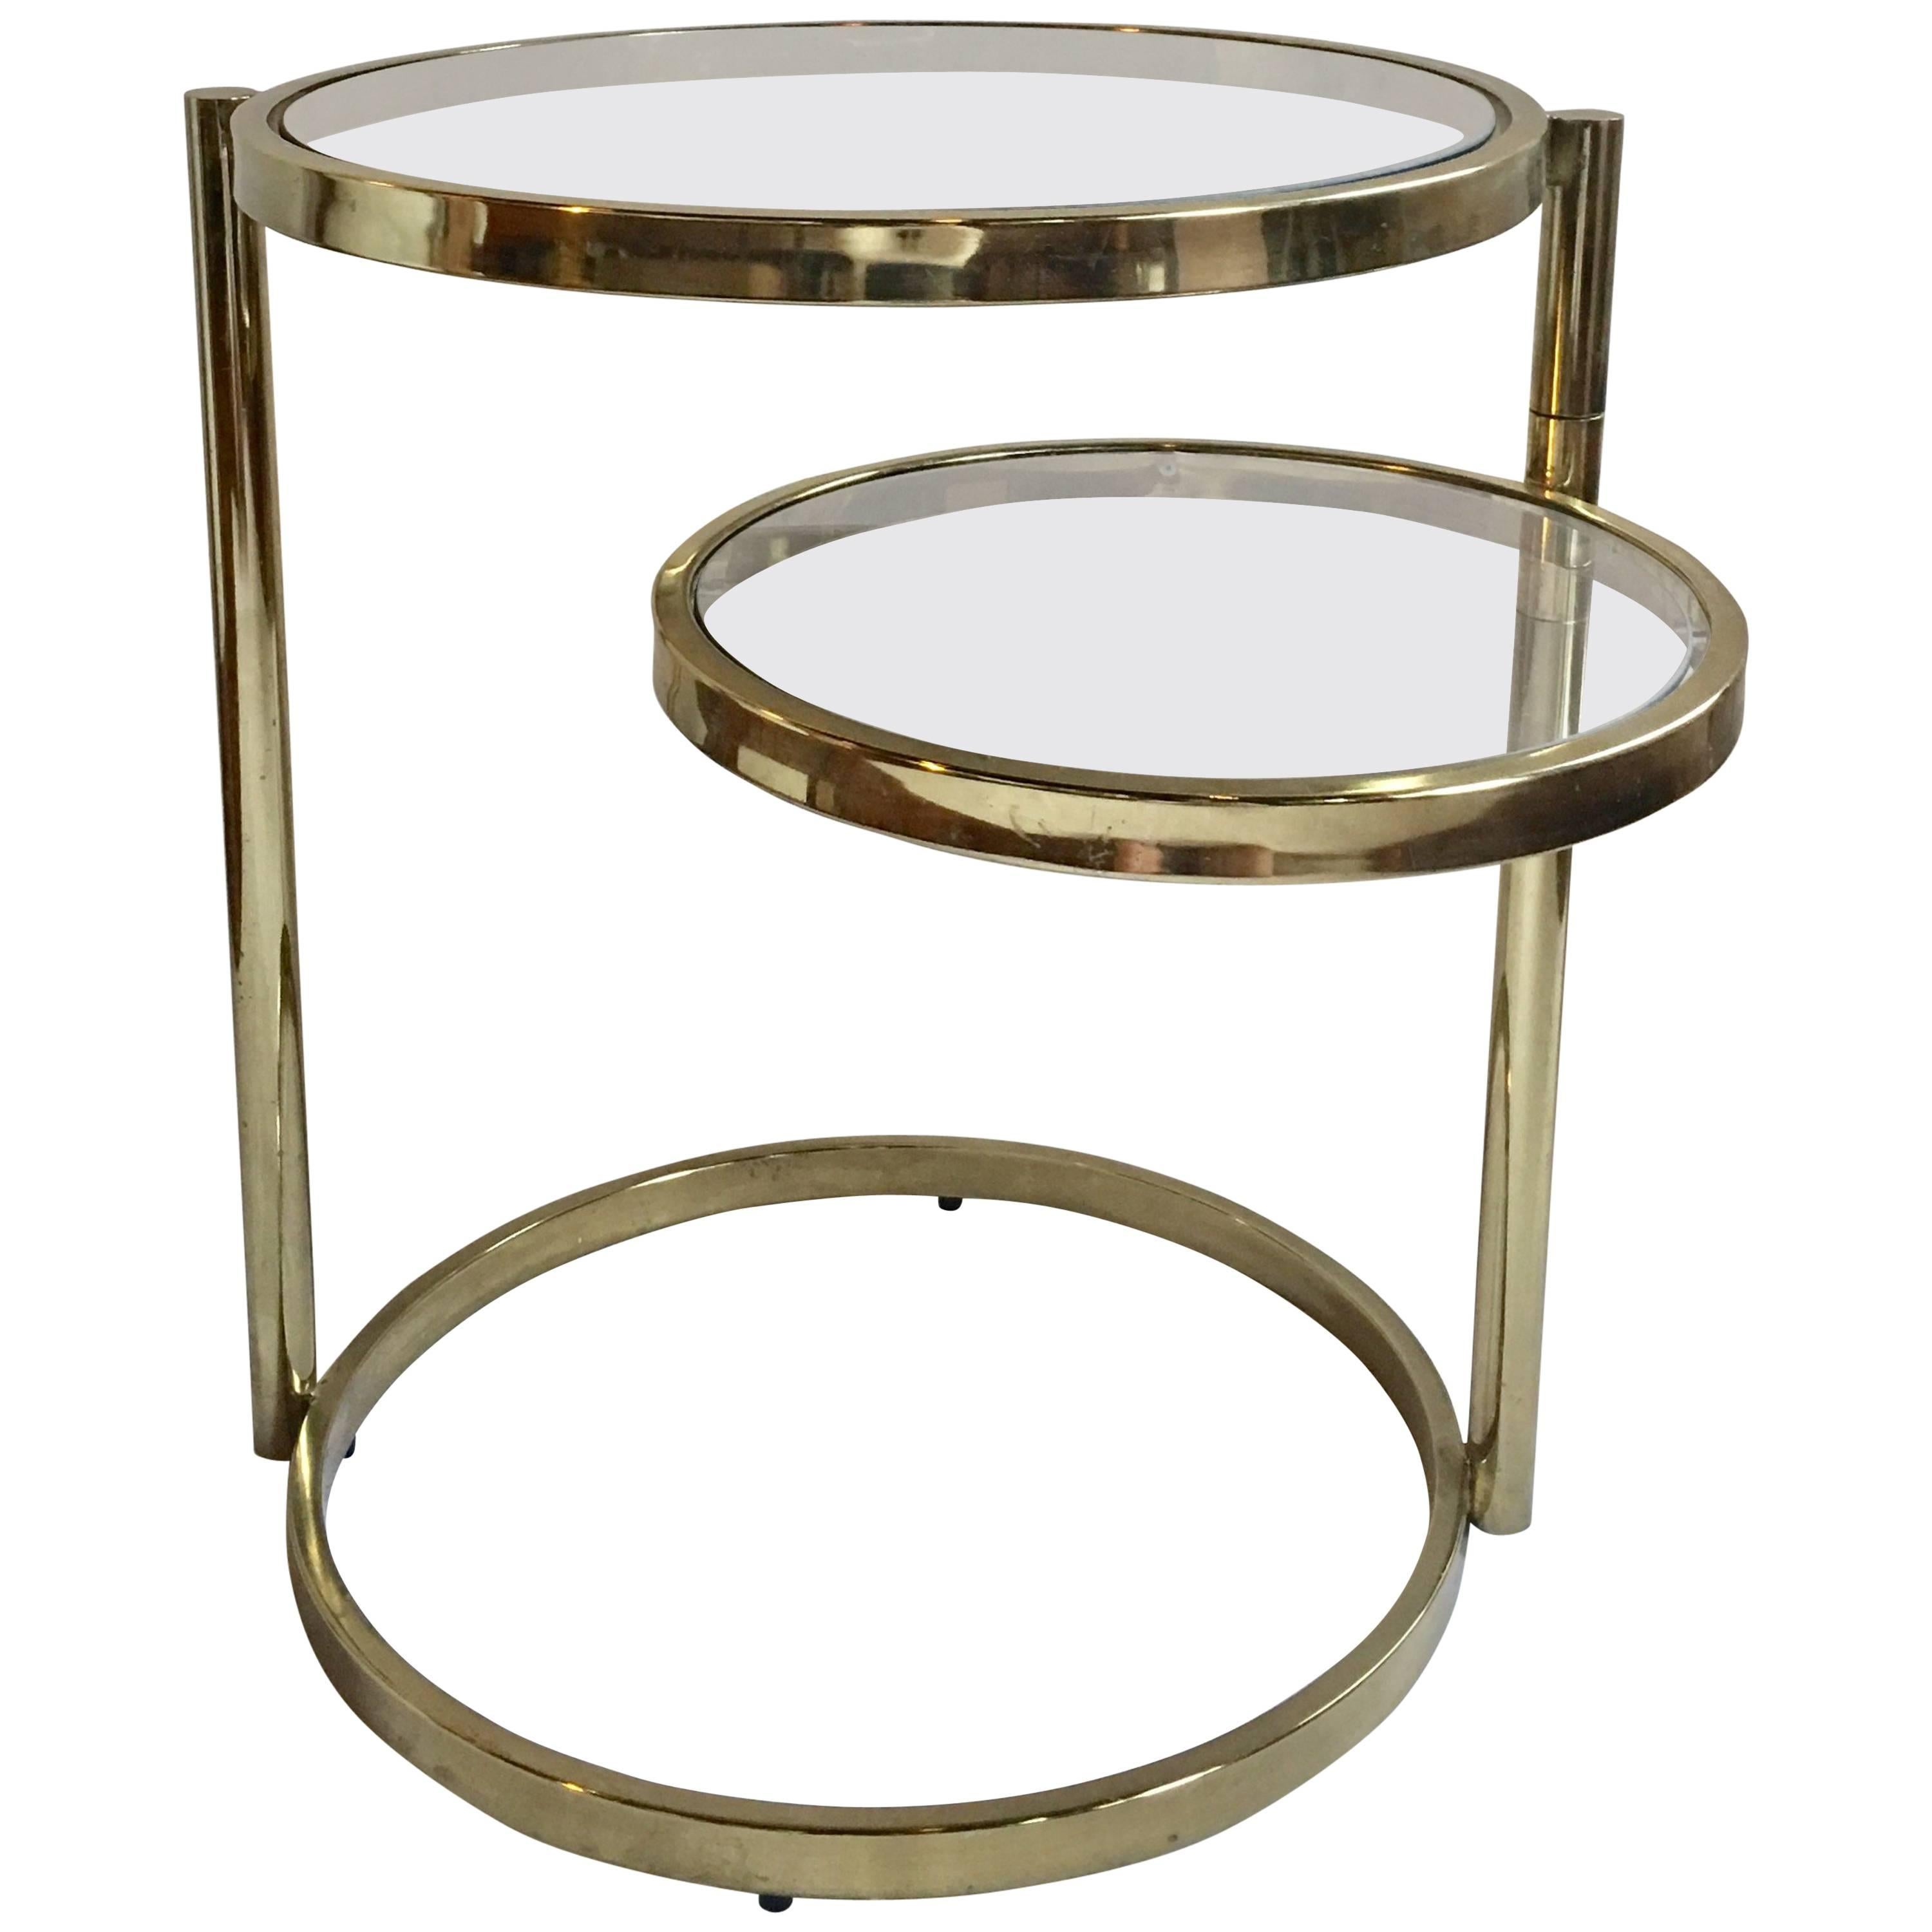 1970s Milo Baughman Style Articulating Brass Side Table with Swiveling Tier